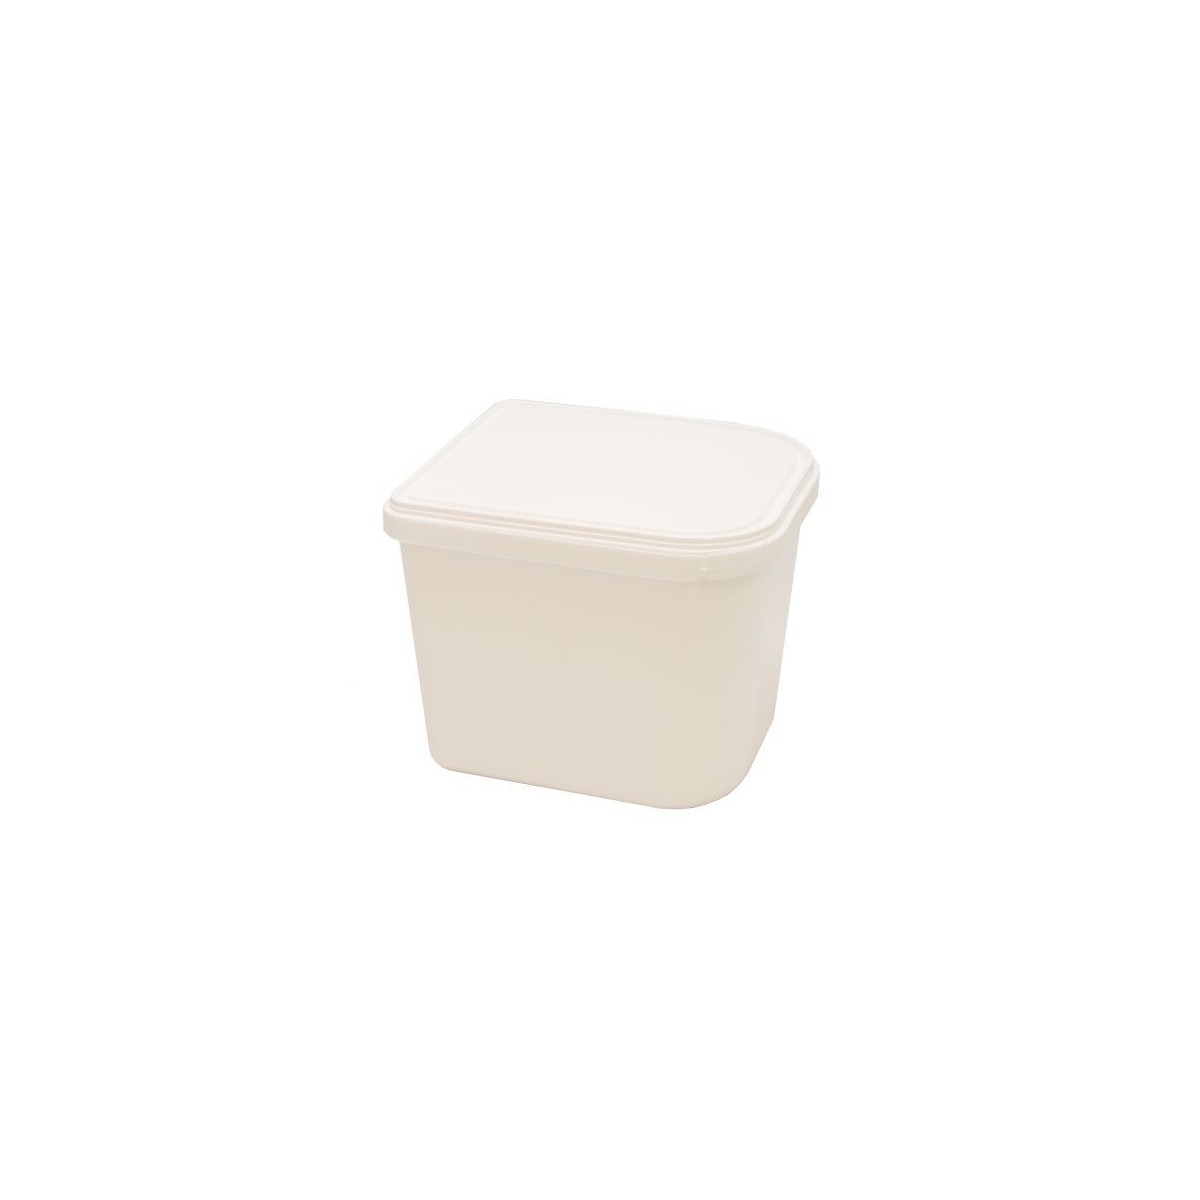 PLASTIC ICE CREAM BOX CADY 2,5L WITH LID 20 PIECES FOSTPLUS INCLUDED  PIECE